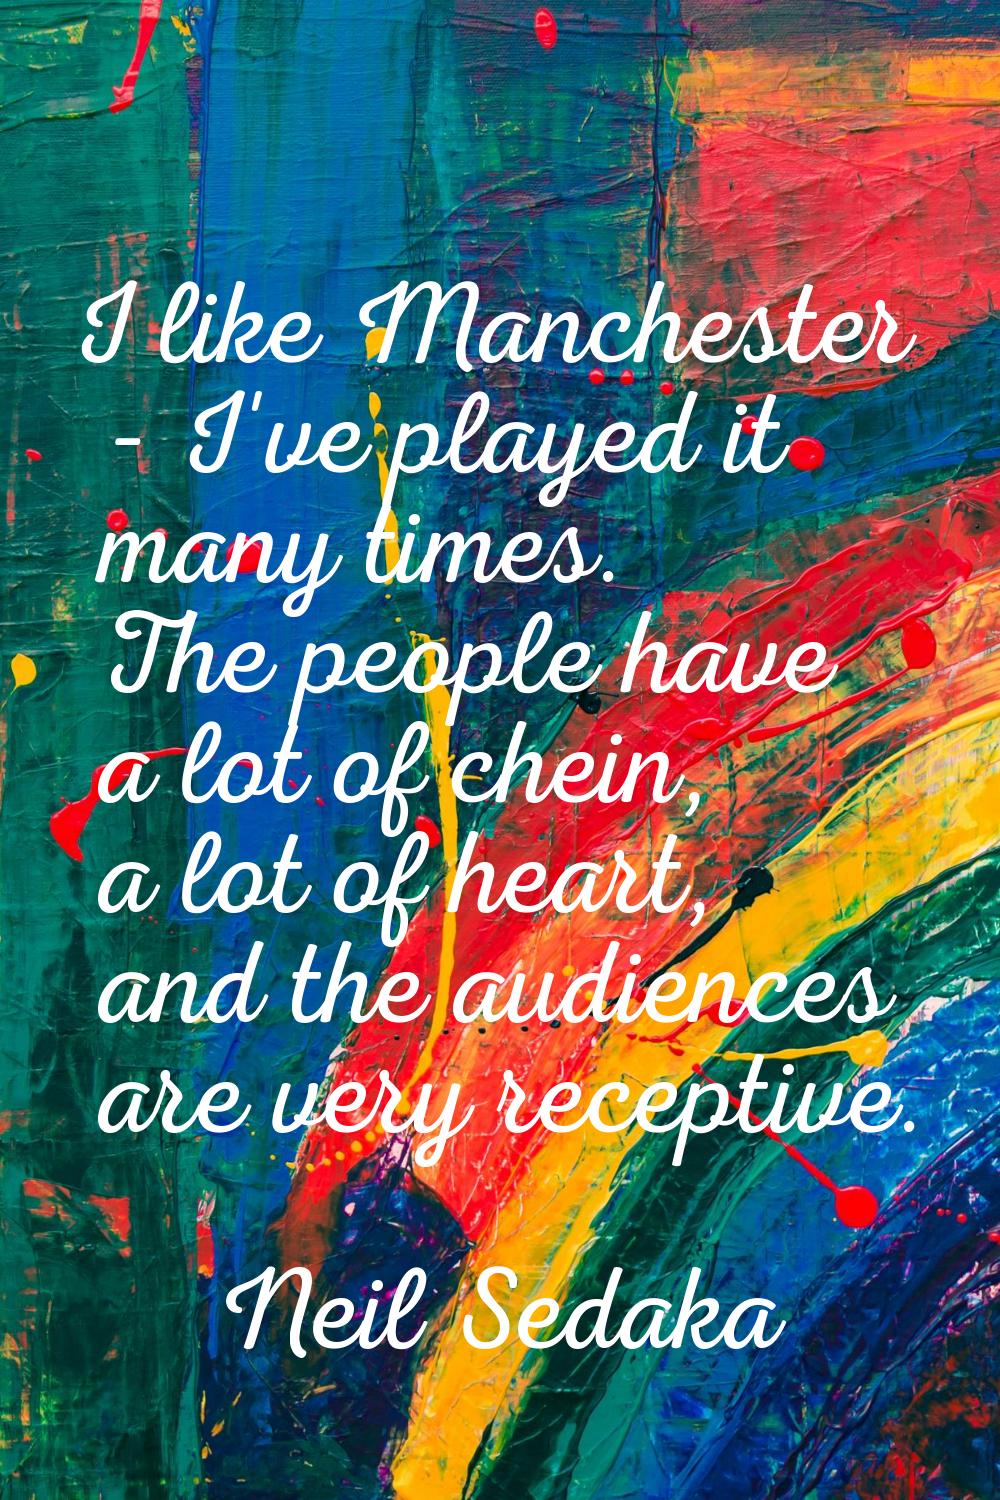 I like Manchester - I've played it many times. The people have a lot of chein, a lot of heart, and 